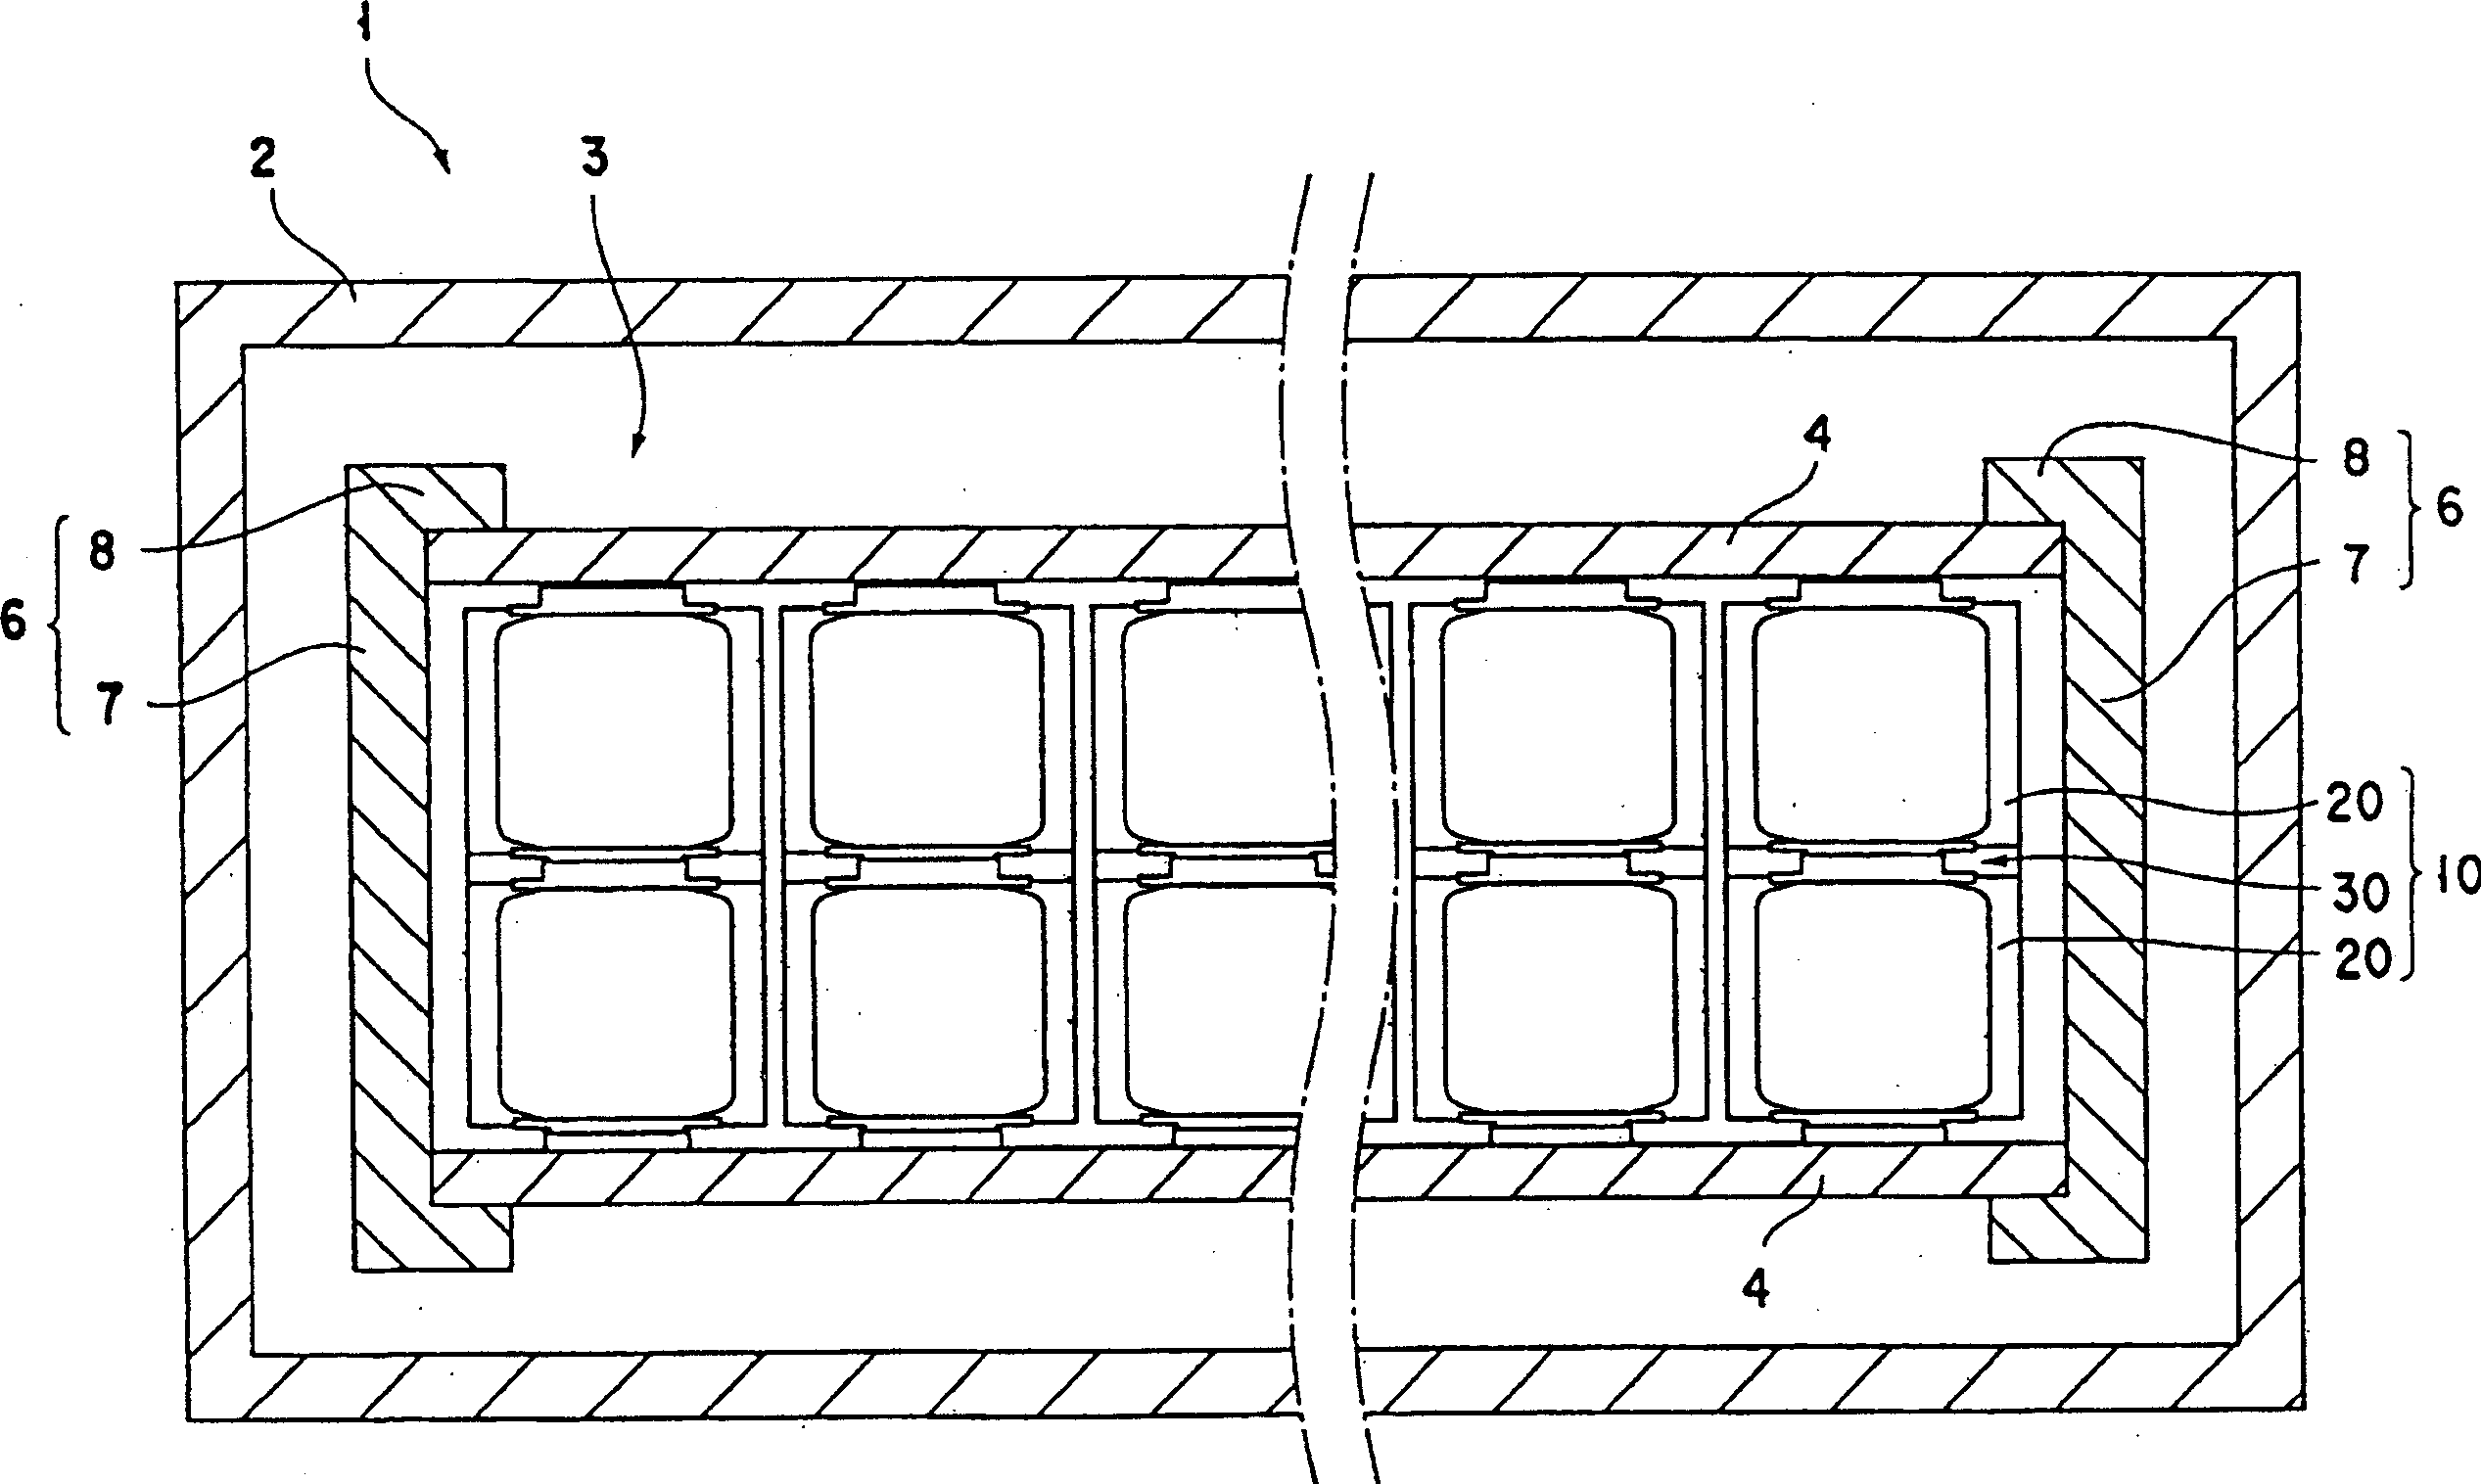 Electric connector, unit for covering its connected part between two terminals, storage cell and bus bar equipped with them